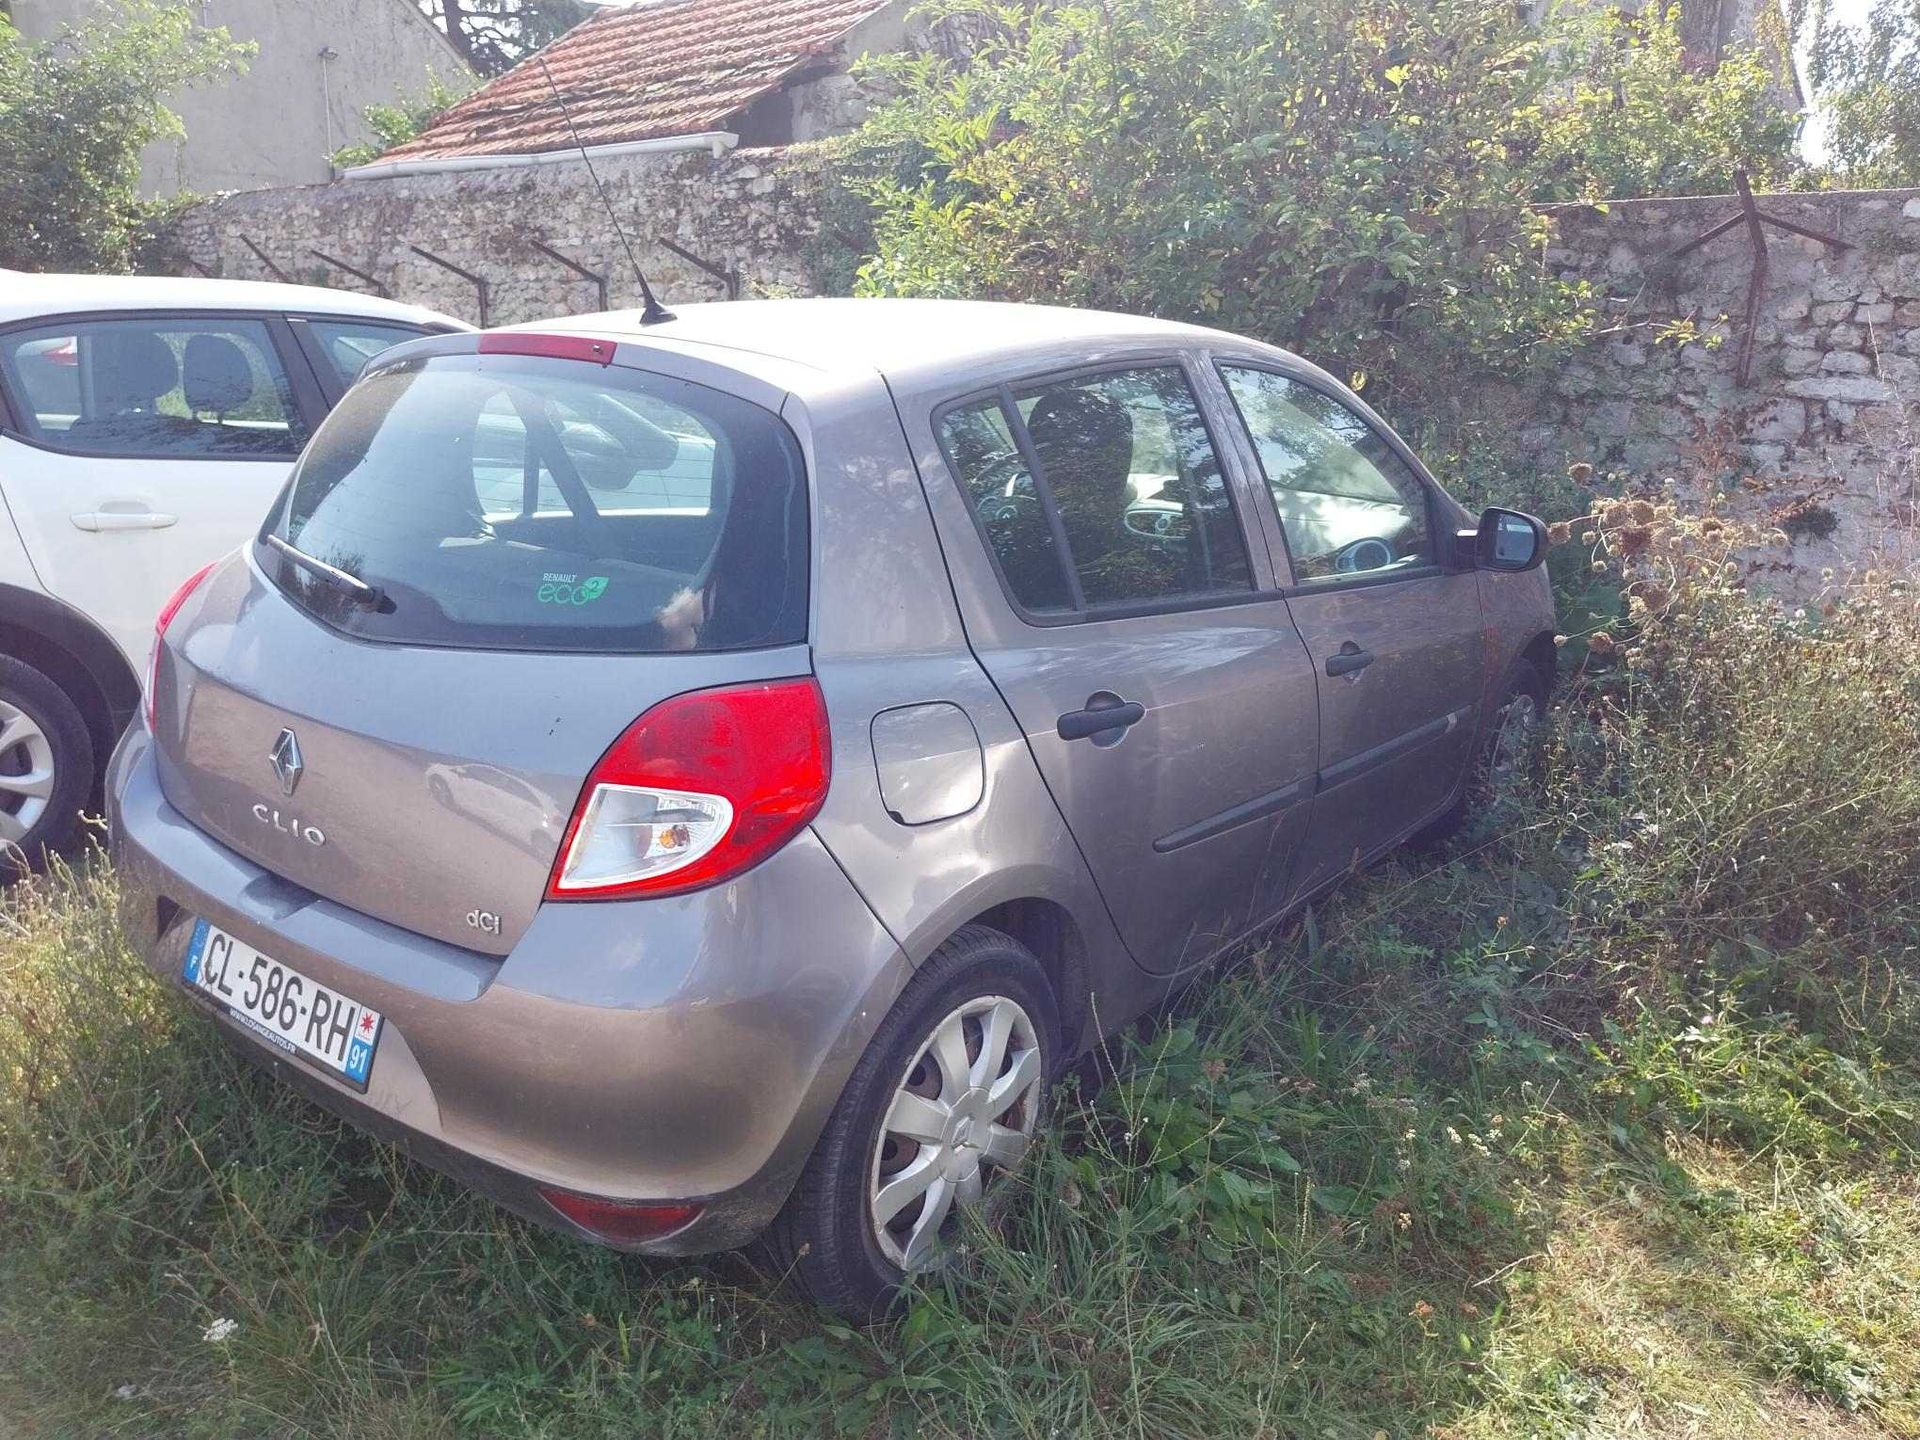 Null [RP] RENAULT CLIO 1.5 dCi eco2 75, Gazole, imm. CL-586-RH, type BR2VOH, n° &hellip;